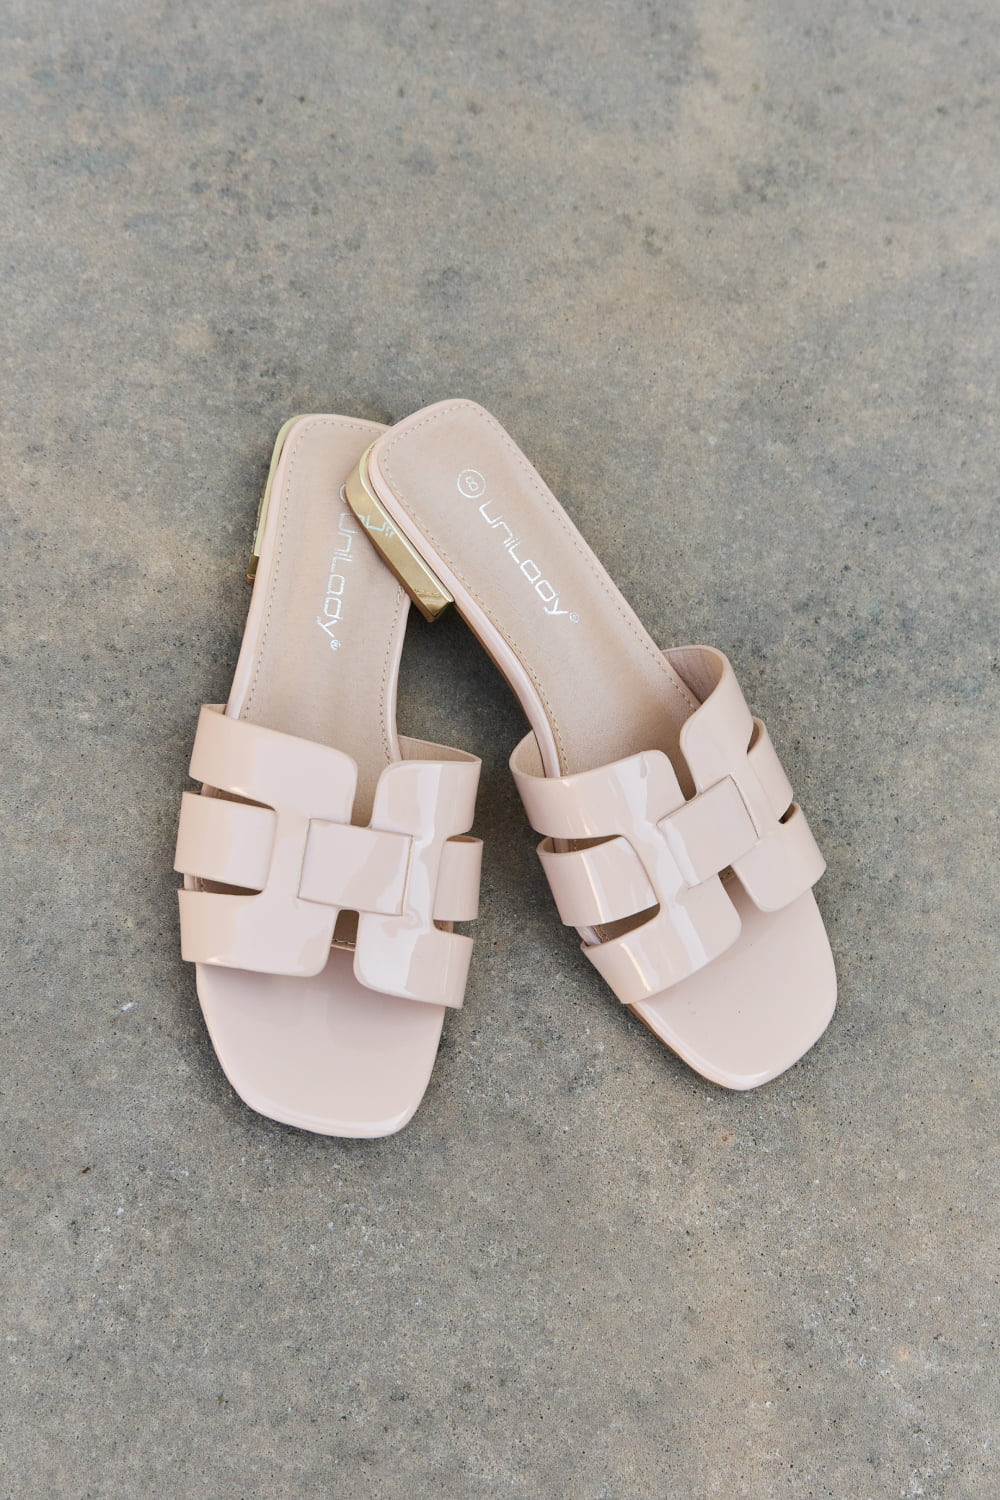 Everyday Sandals in Cream Shoes RYSE Clothing Co.   